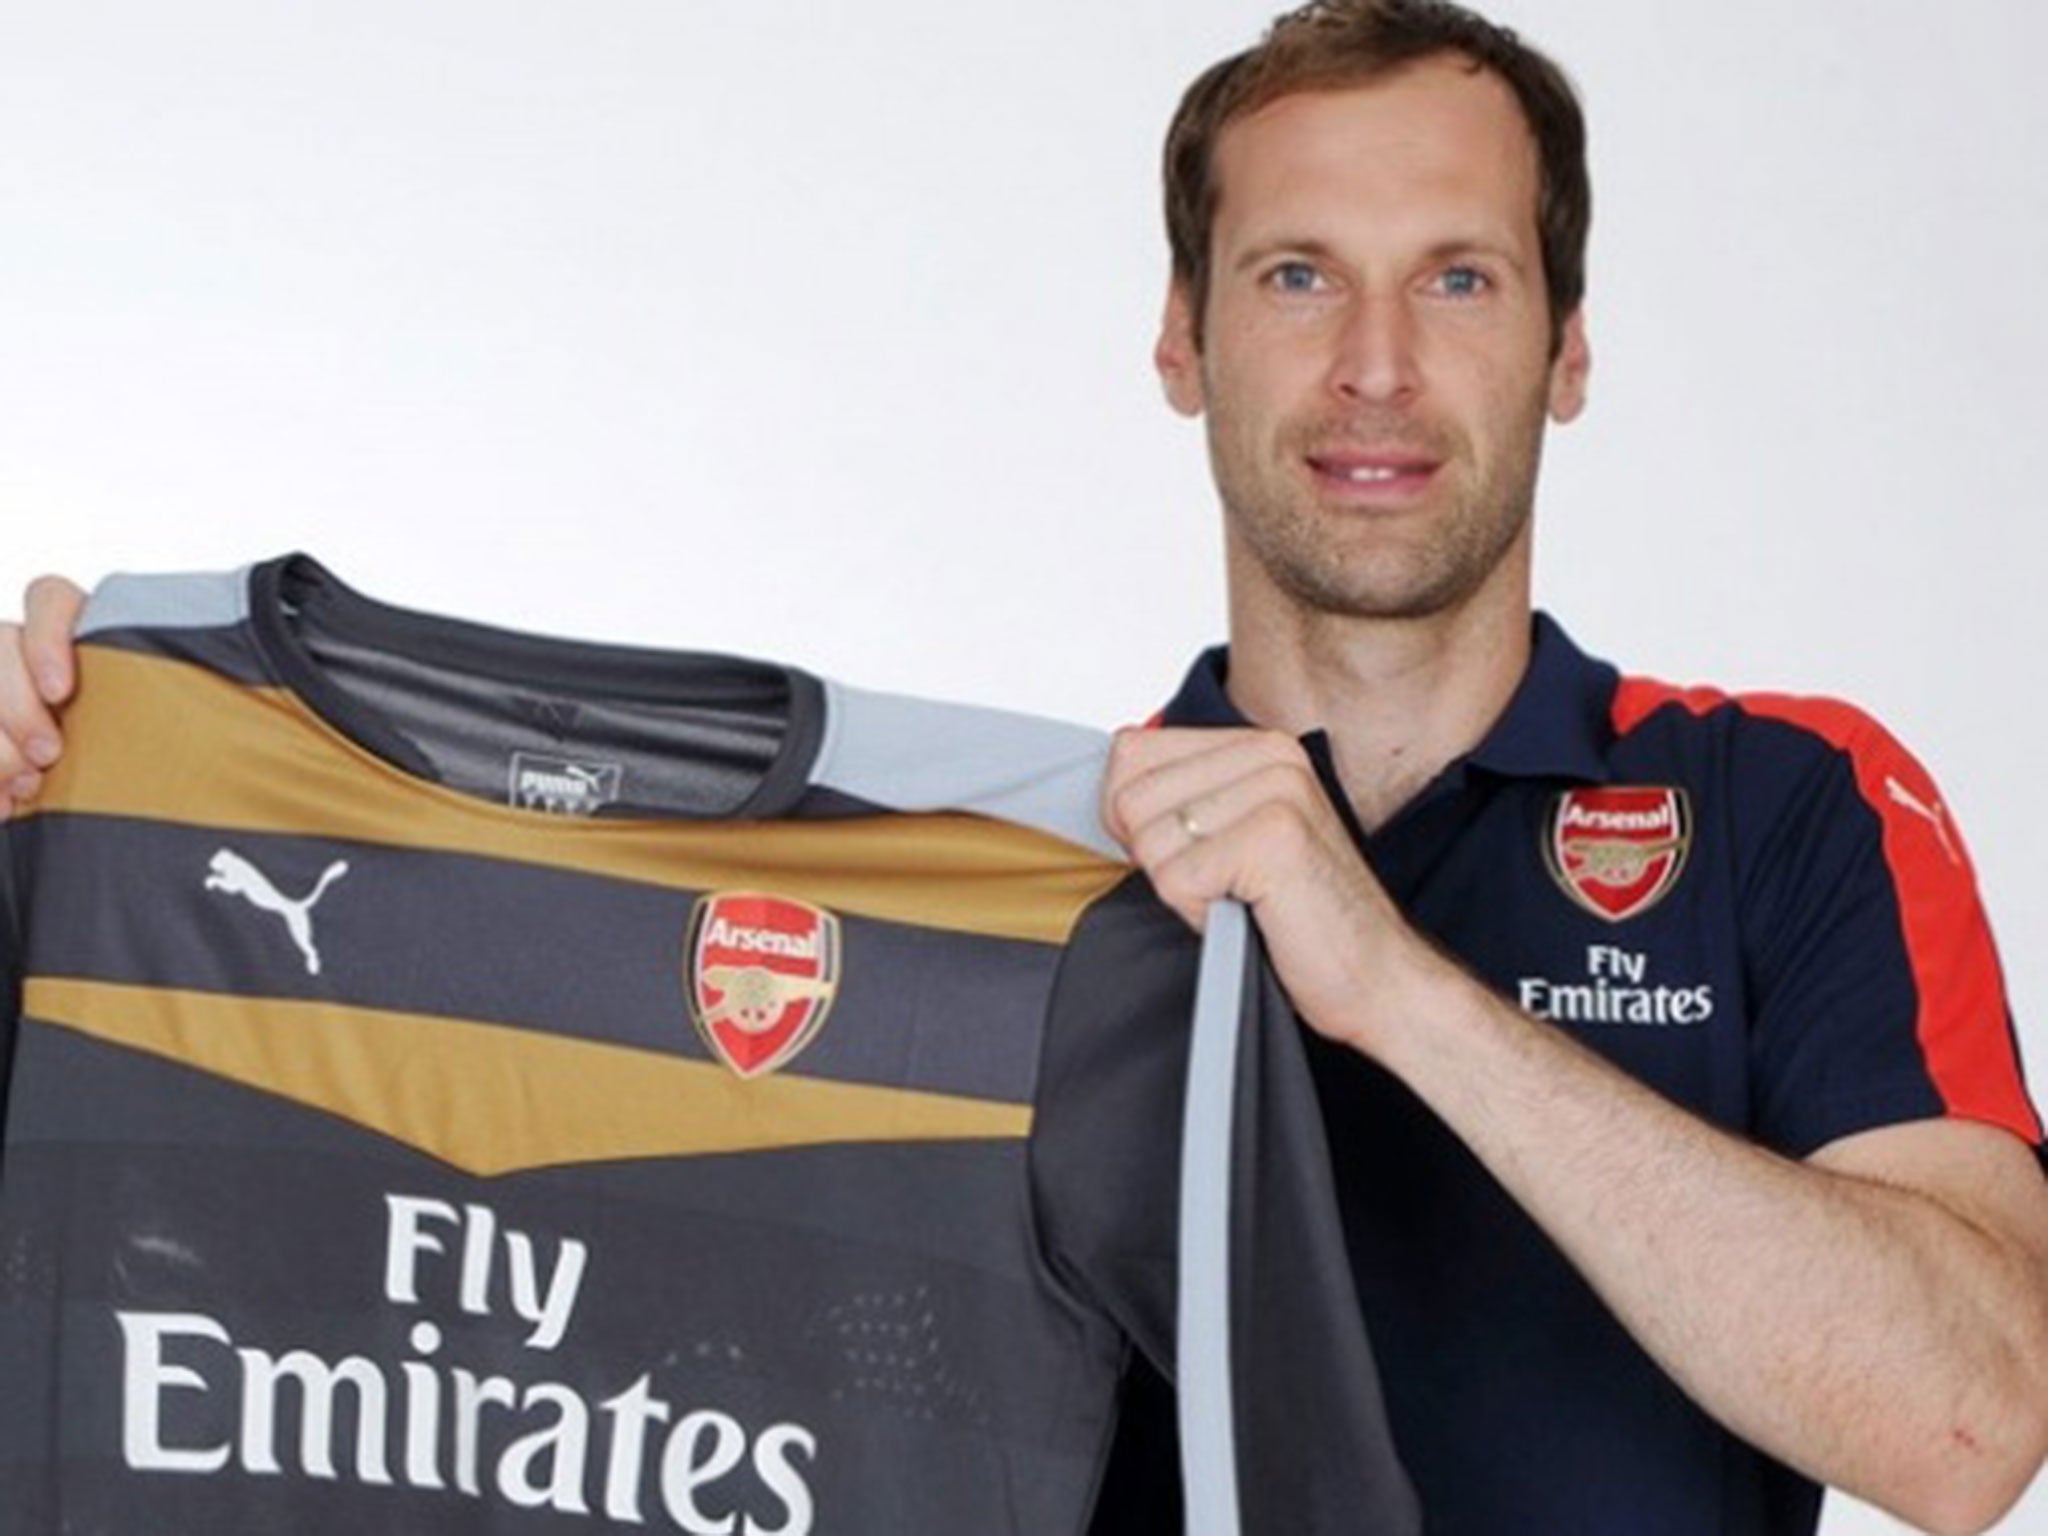 Petr Cech has joined Arsenal